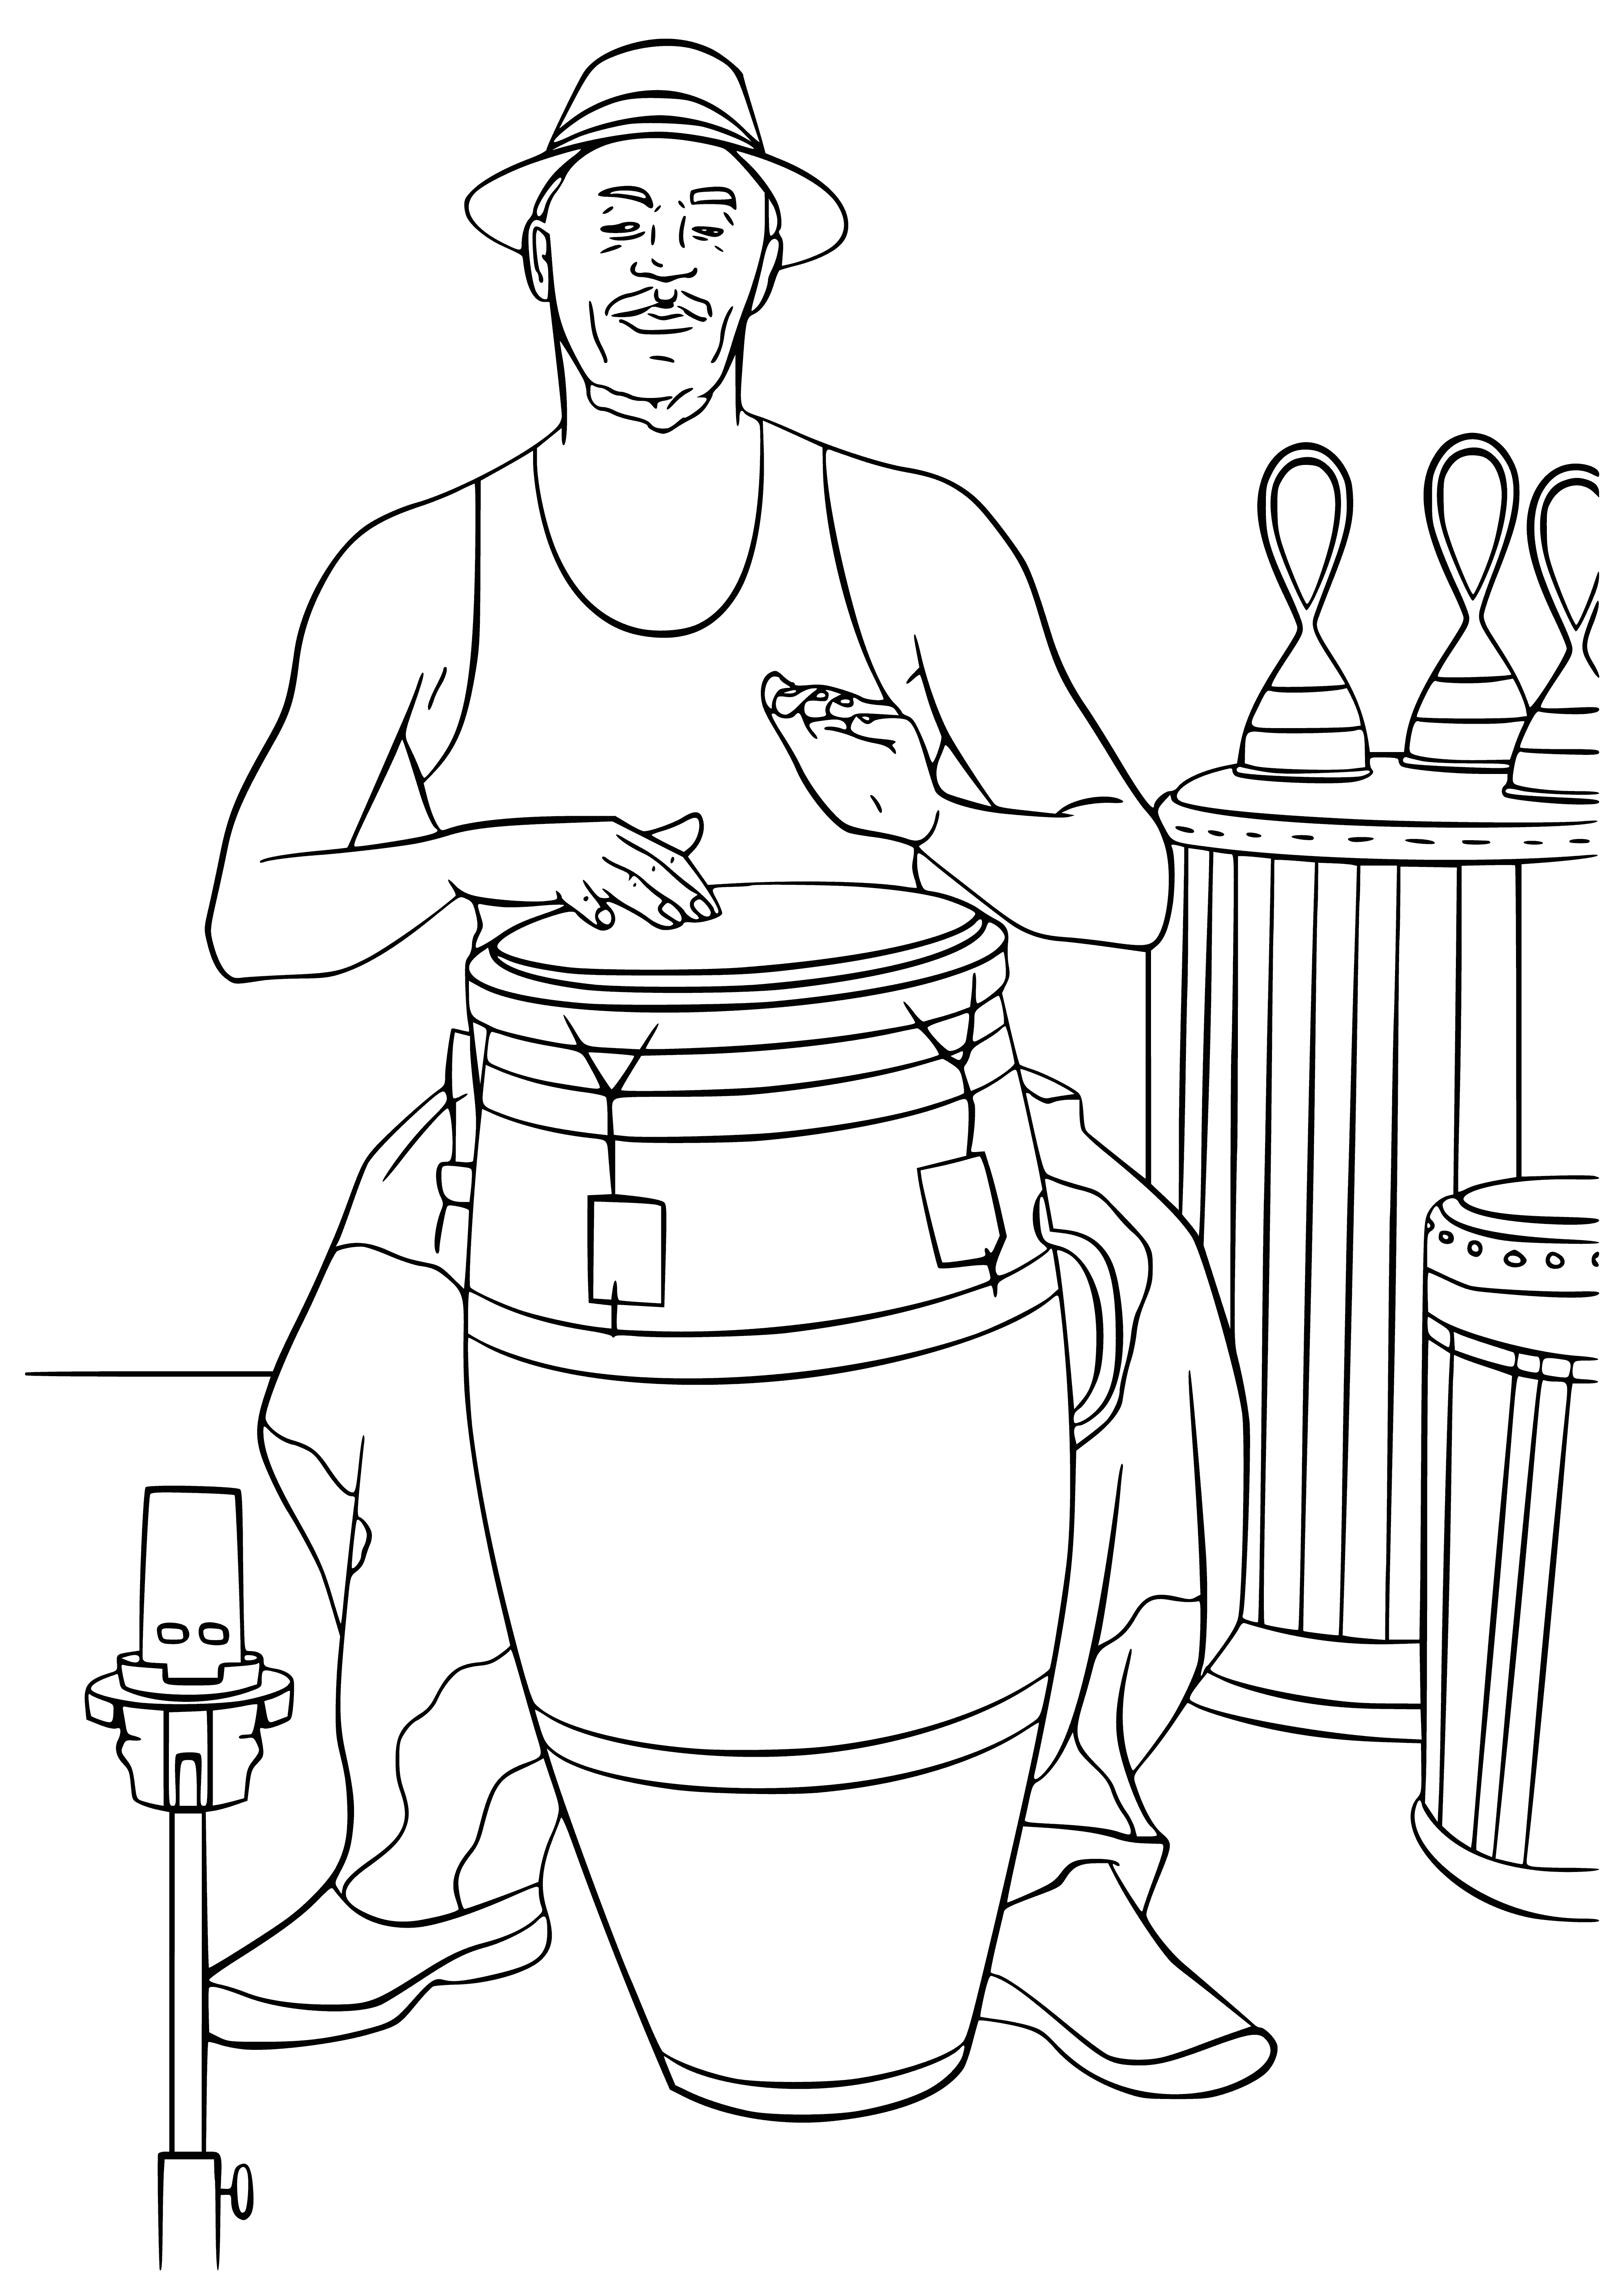 Drummer coloring page